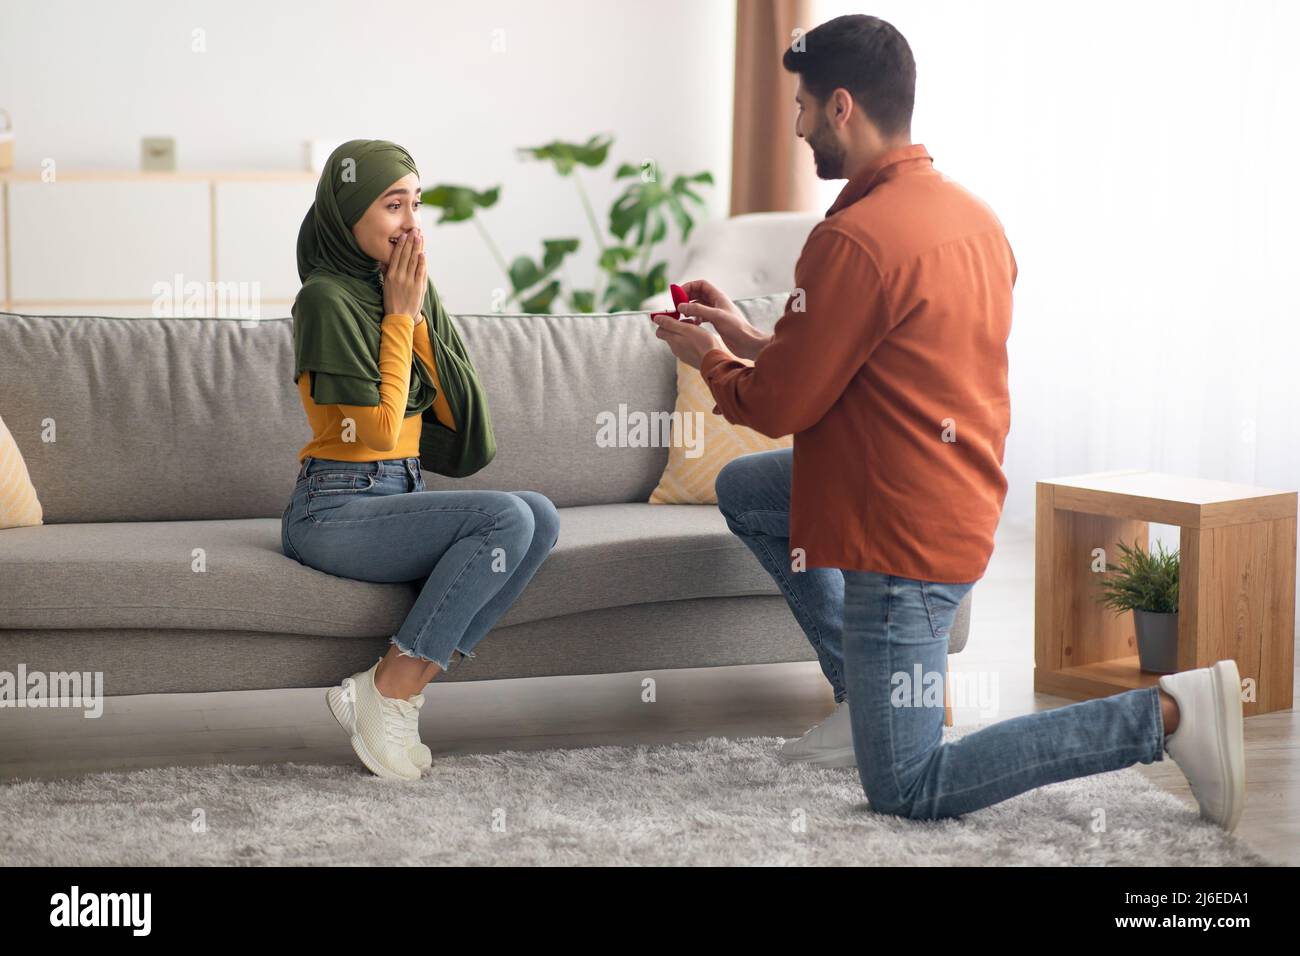 Muslim Man Proposing To Woman Offering Engagement Ring At Home Stock Photo